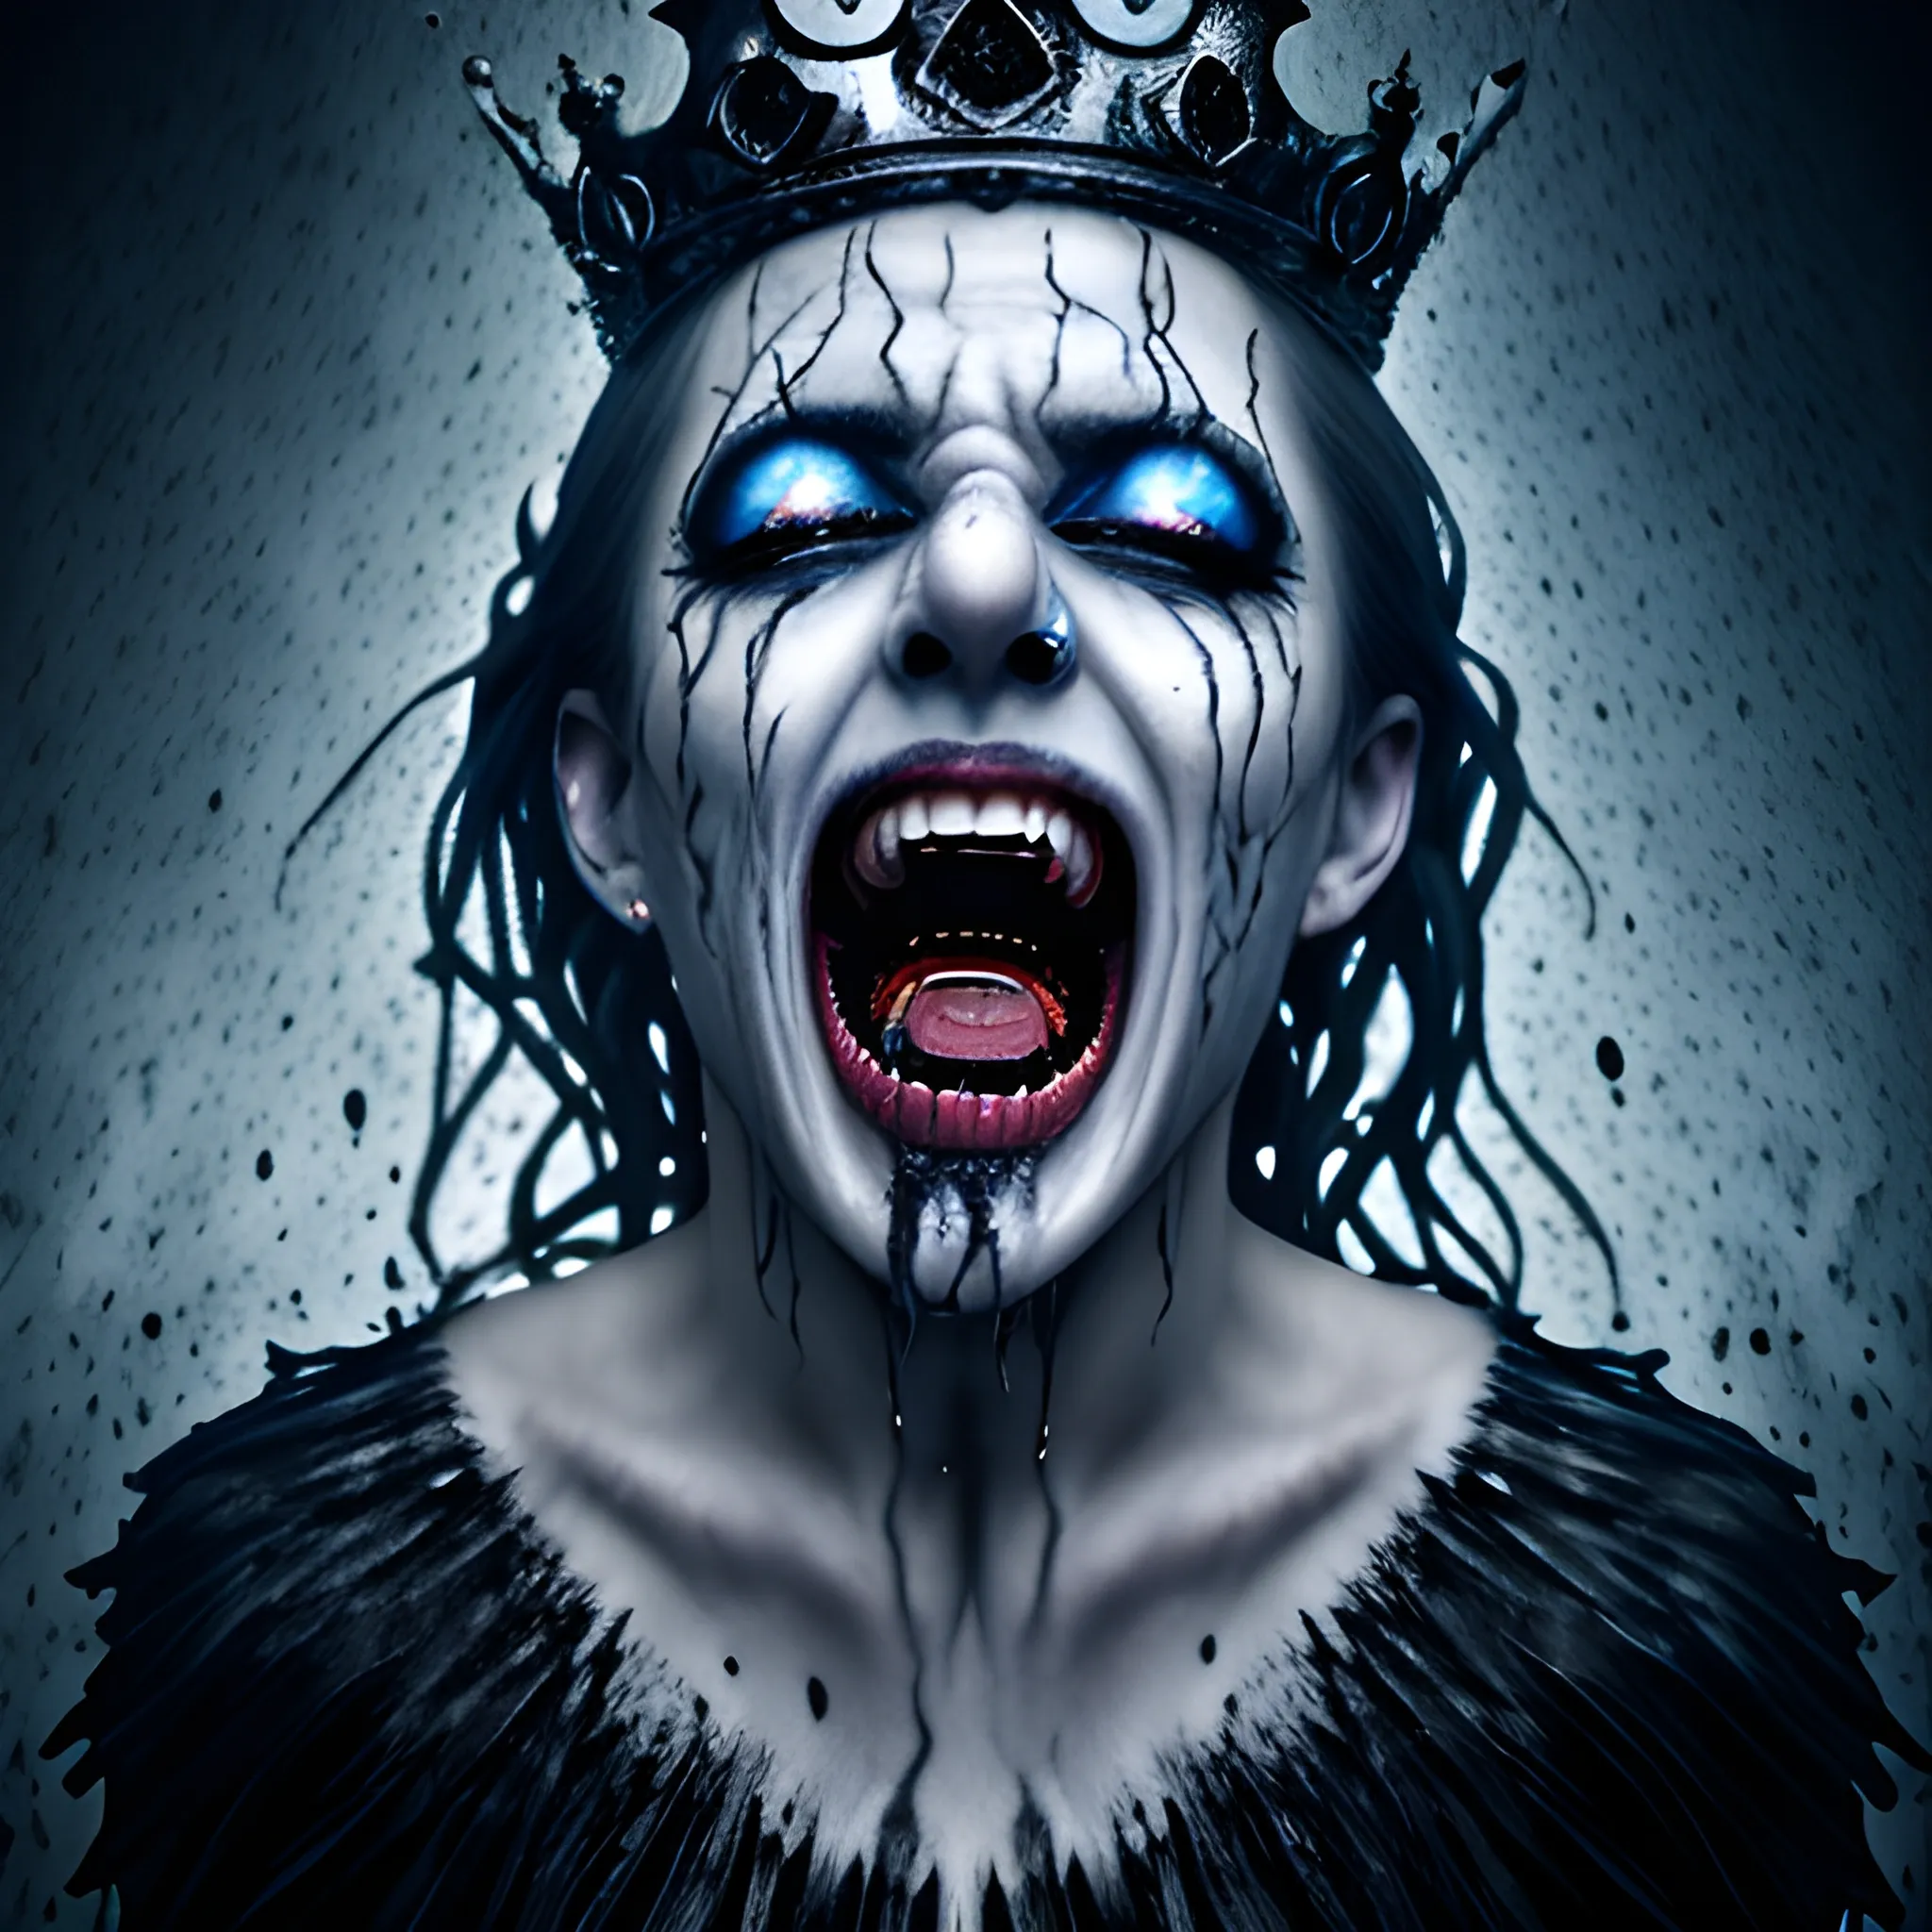 photorealistic image of the king of ghosts screaming with a black crown, full body, ominous smile, dimmed lighting, blue painted wet hair, wet makeup, evil grim, bokeh lighting